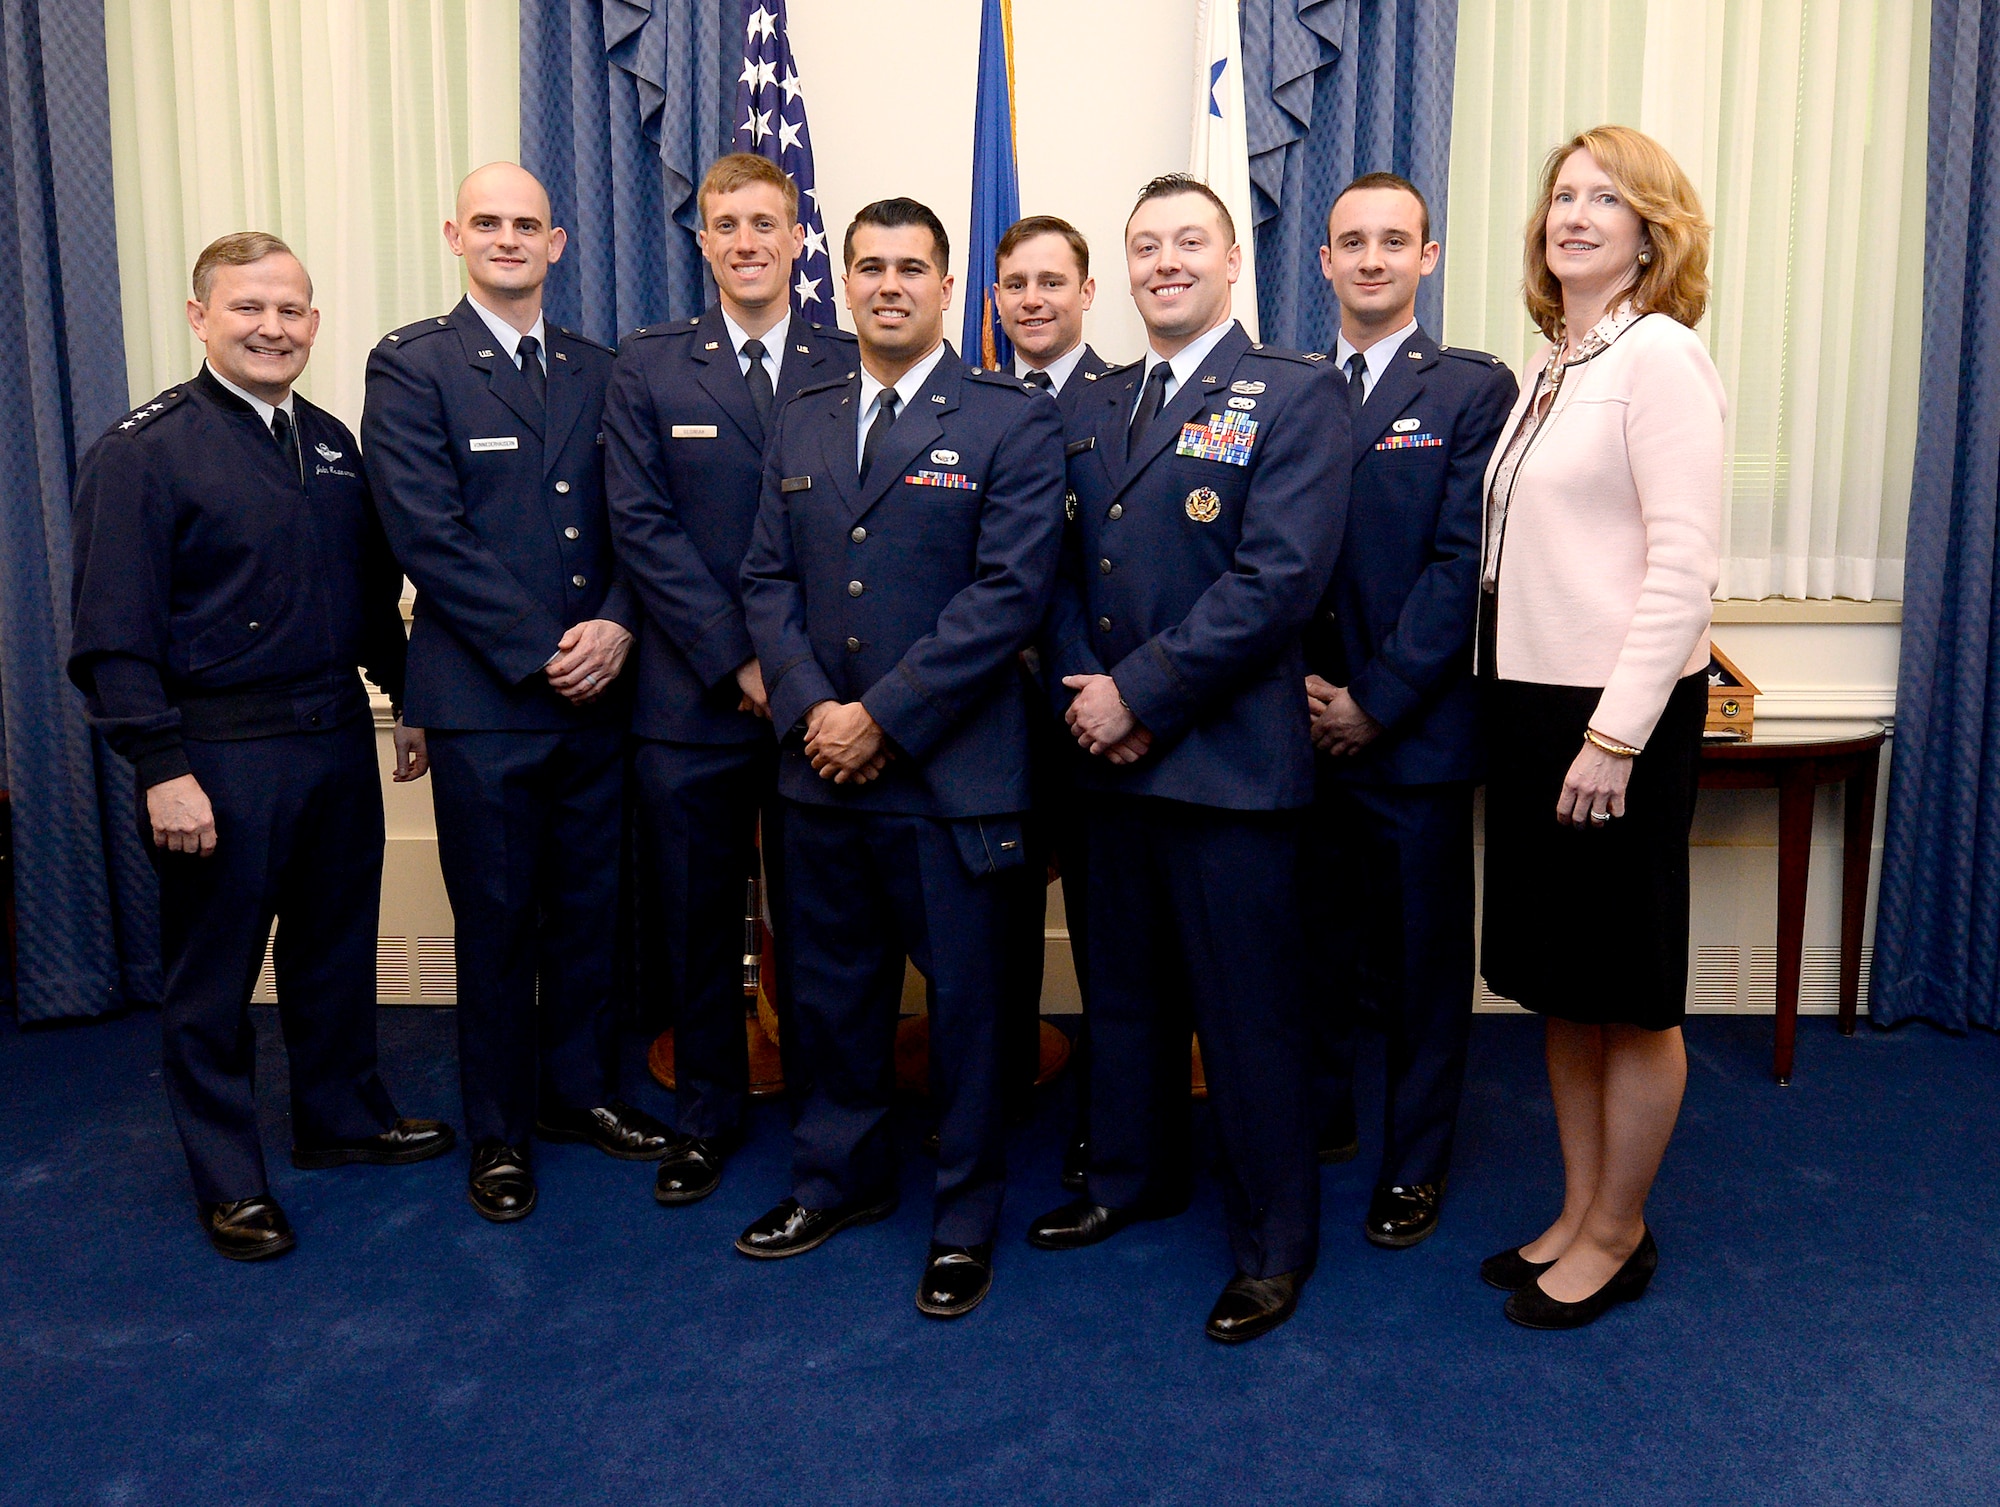 Lt. Gen. John Hesterman, the Air Force assistant vice chief of staff, and Under Secretary of the Air Force Lisa S. Disbrow congratulate Team Active Shooter Protection in the Pentagon, Feb. 29, 2016. (U.S. Air Force photo/Scott M. Ash)